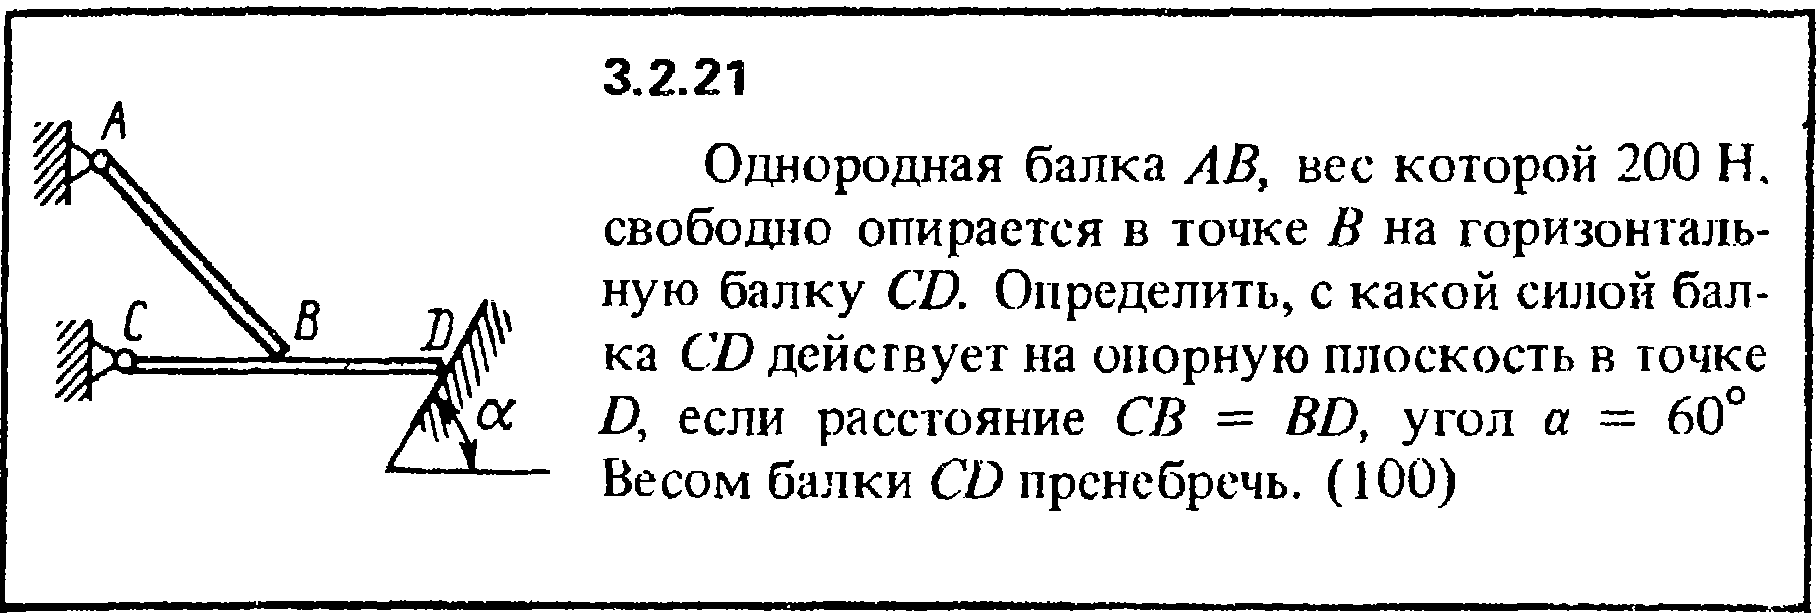 3.2.21 The solution of the problem of the collection of